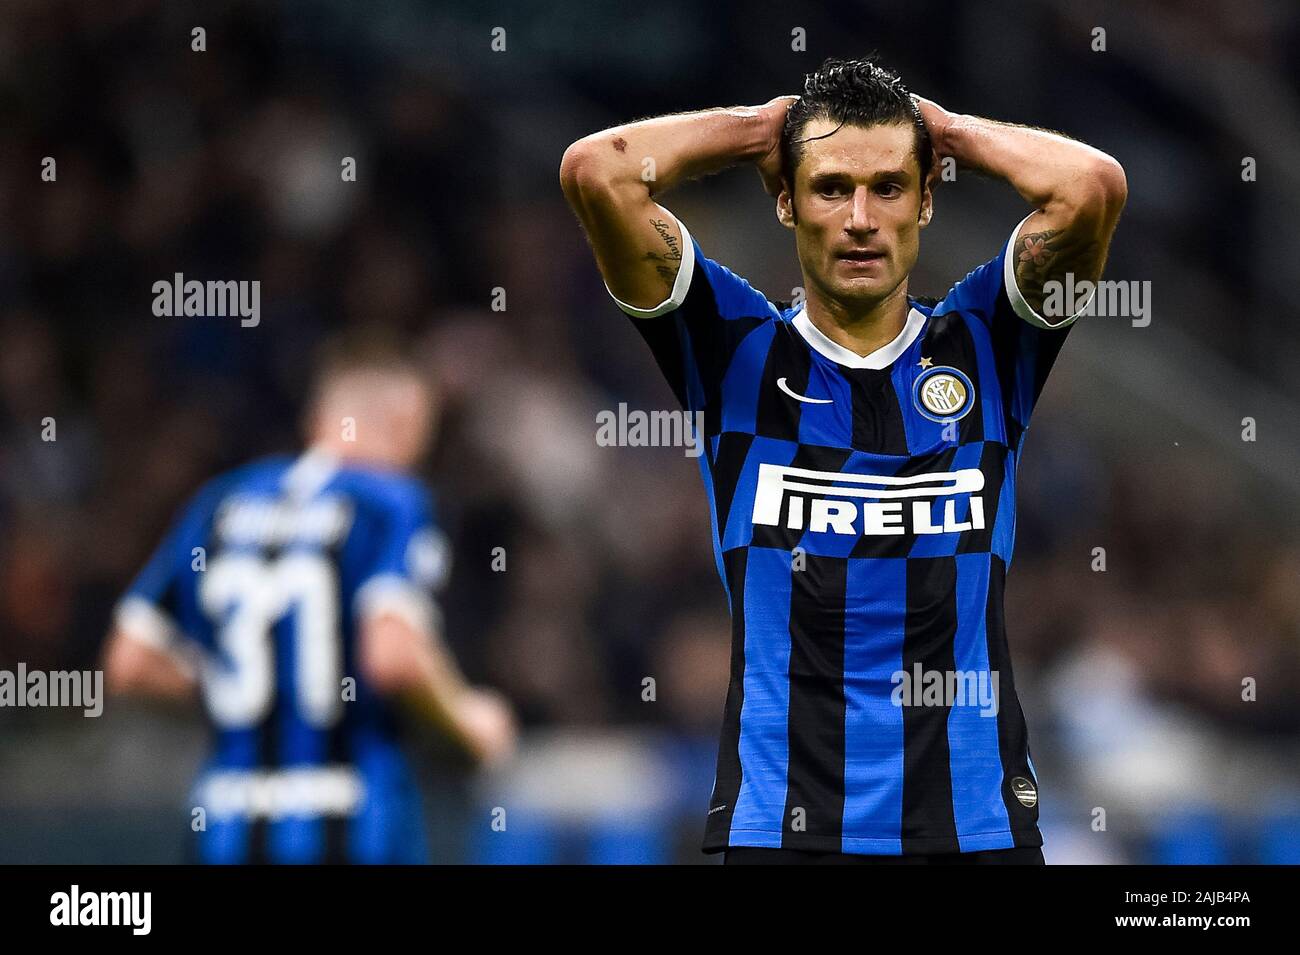 Milan, Italy - 26 October, 2019: Antonio Candreva of FC Internazionale looks dejected during the Serie A football match between FC Internazionale and Parma Calcio. The match ended in a 2-2 tie. Credit: Nicolò Campo/Alamy Live News Stock Photo